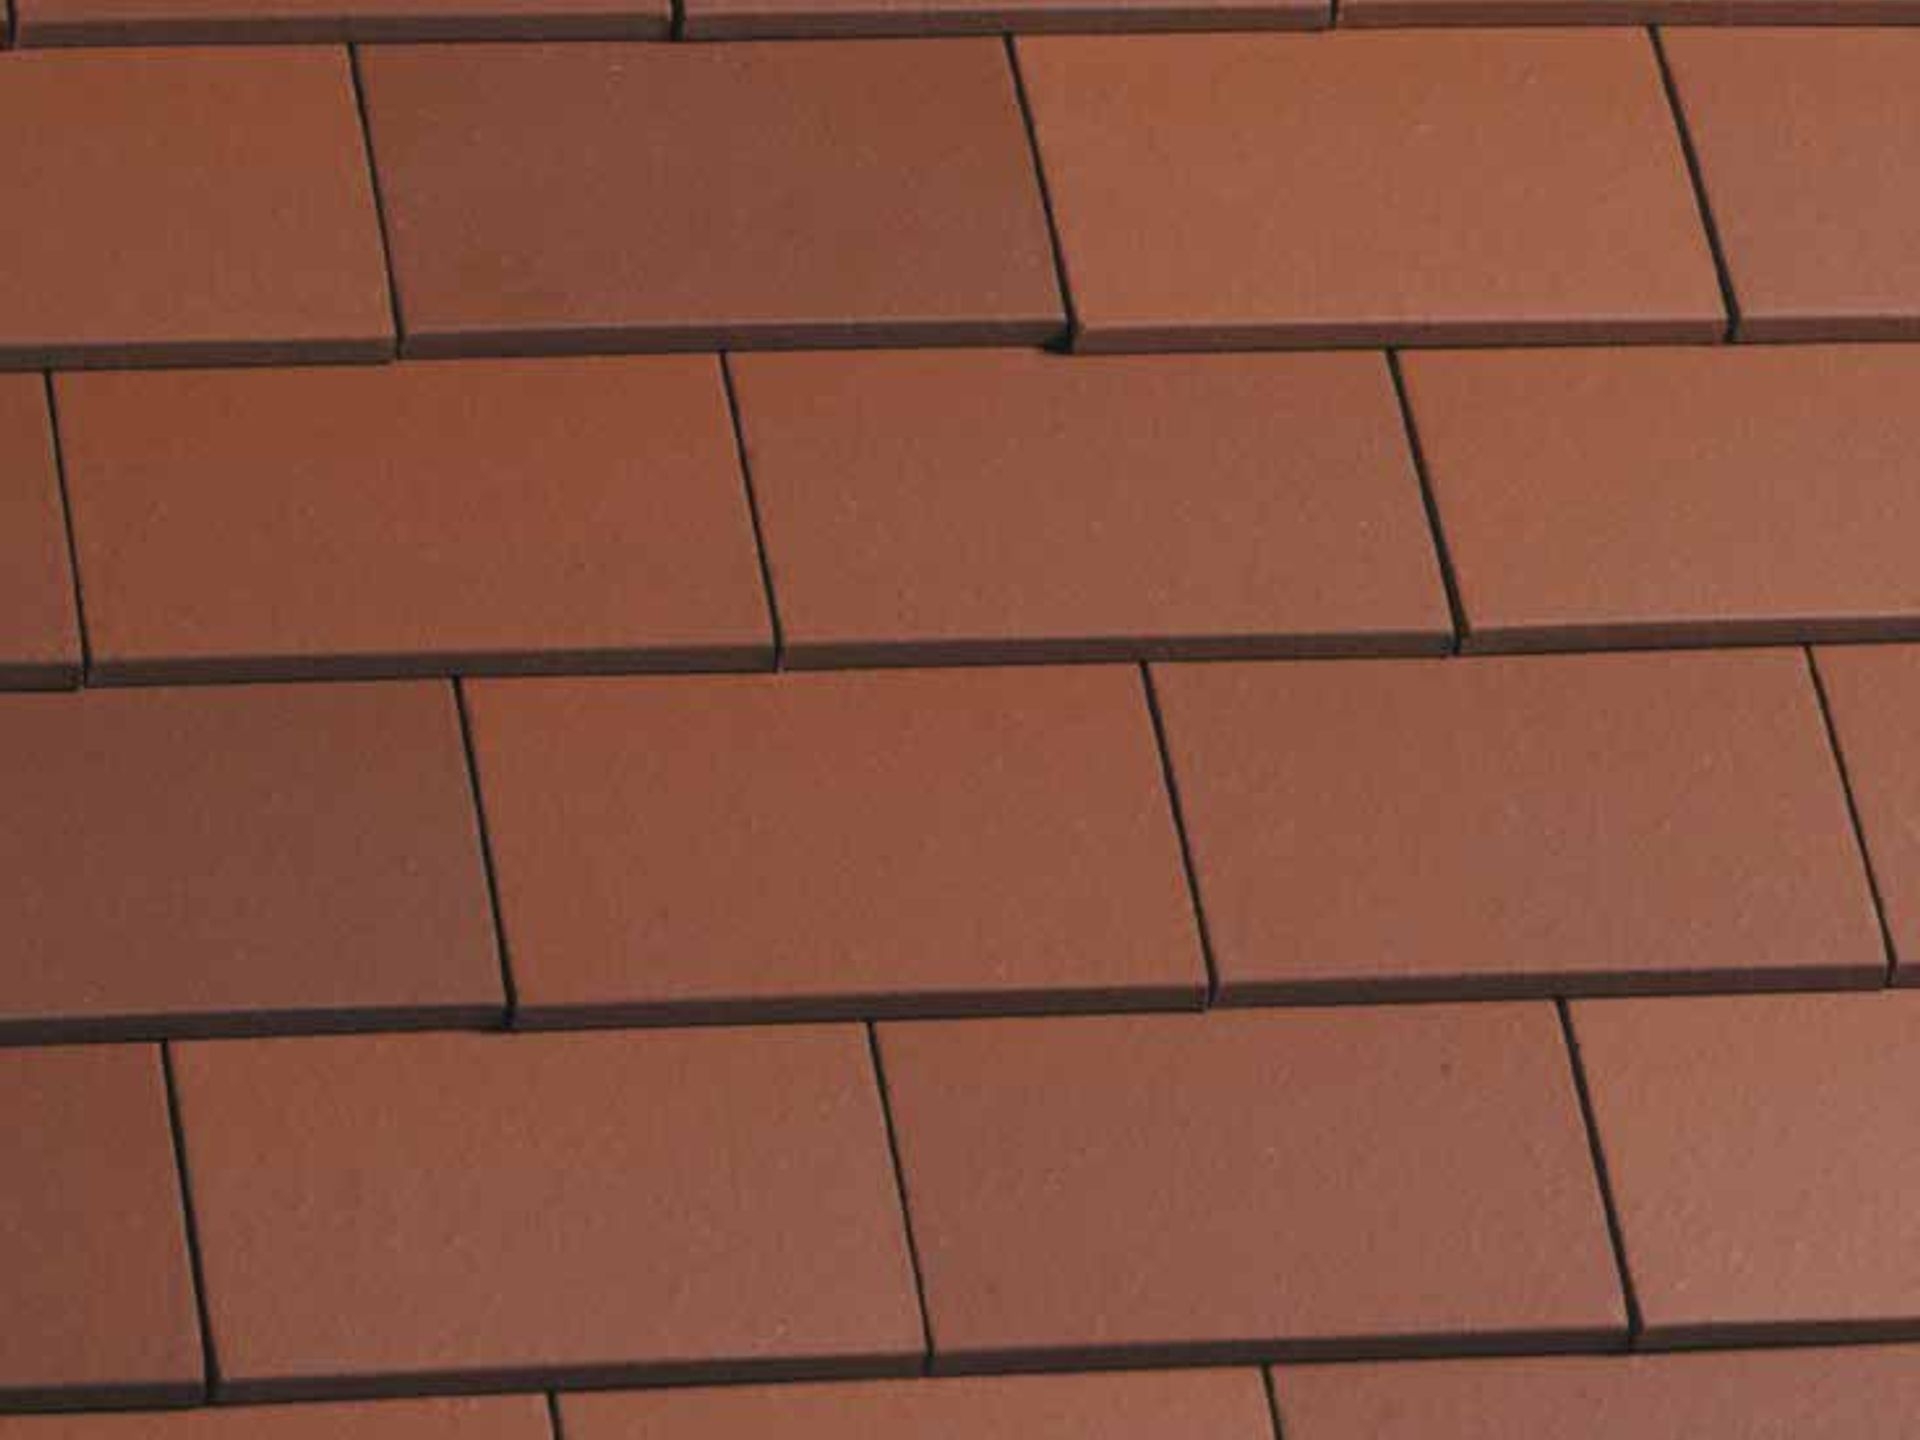 Reusable clay tiles are a modern and lower carbon interpretation of the brick used locally.